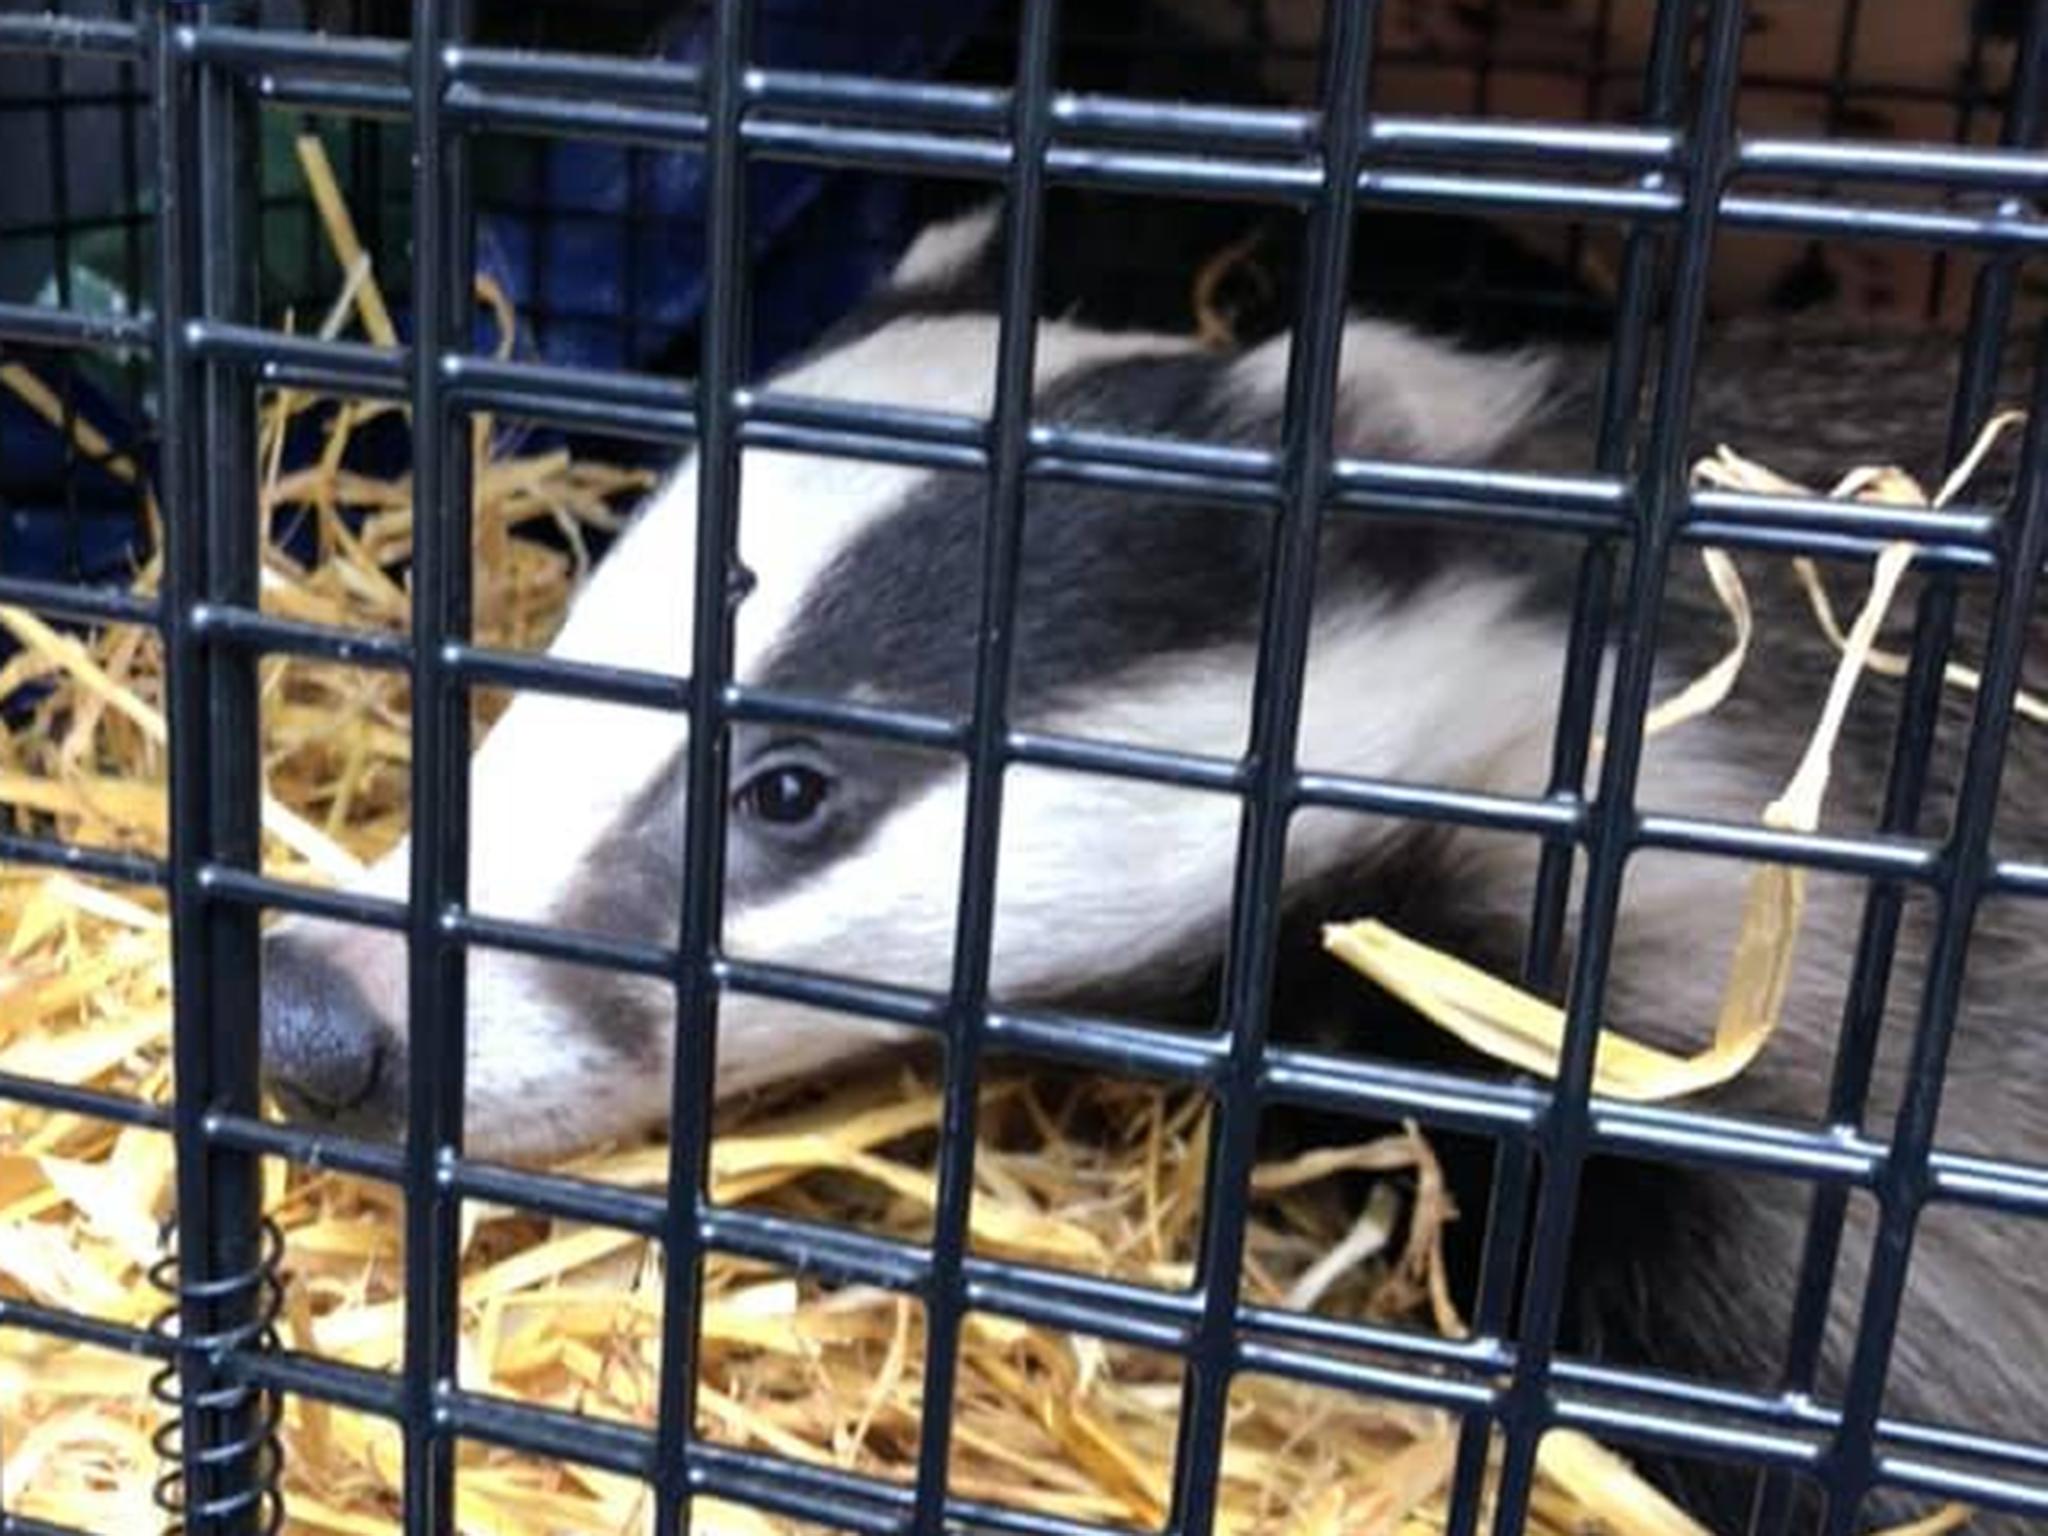 Young badger hid itself in shop and had to be saved by local badger welfare group